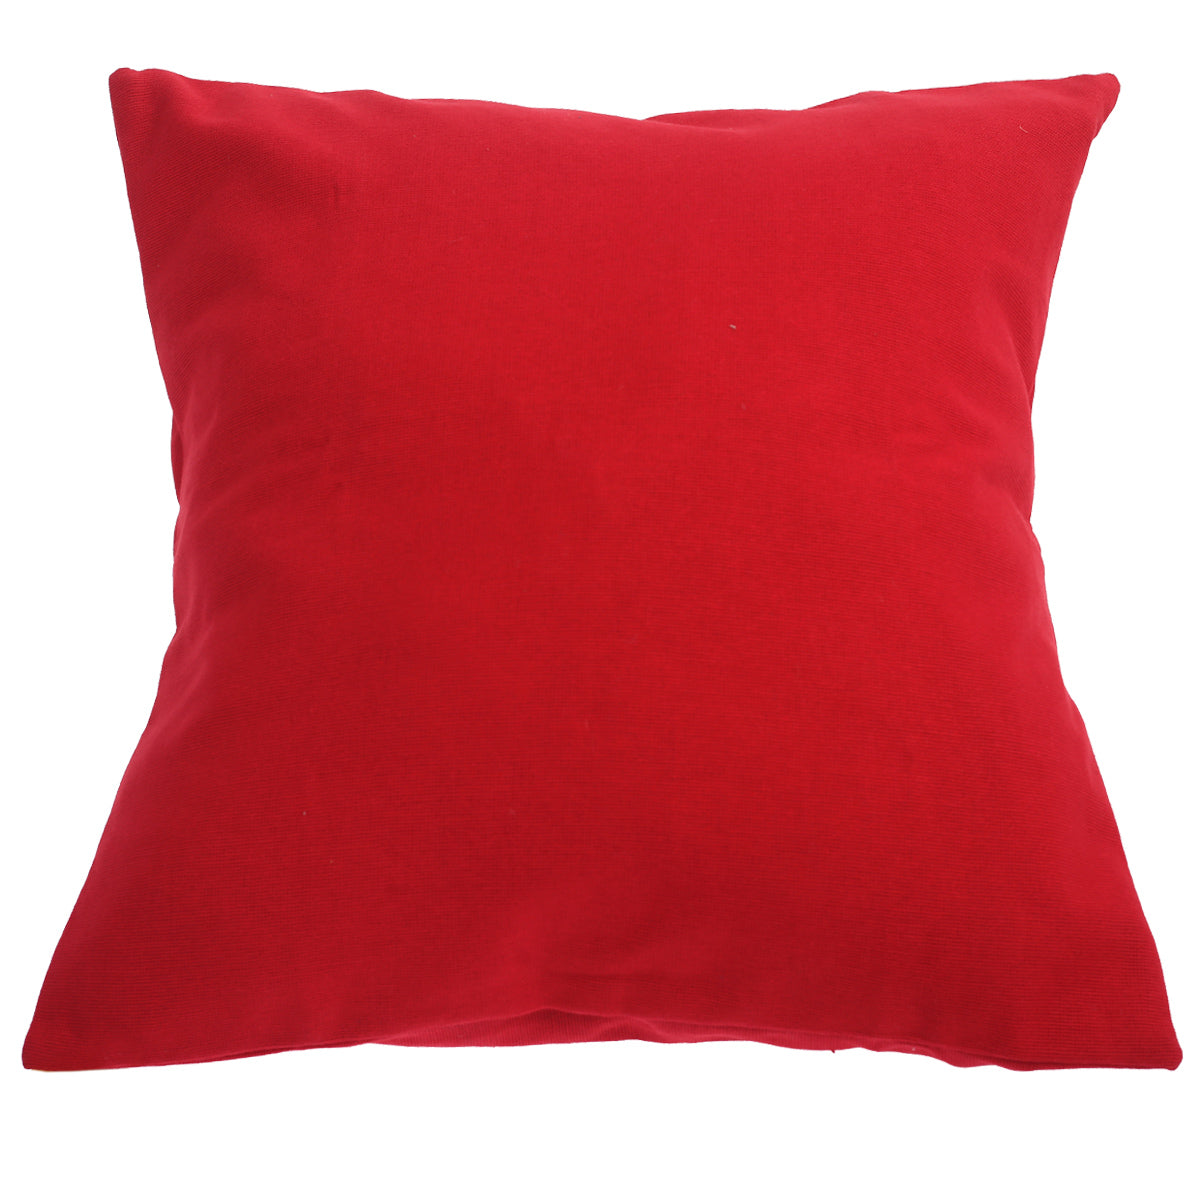 Red Plan Cushion Cover 18x18"